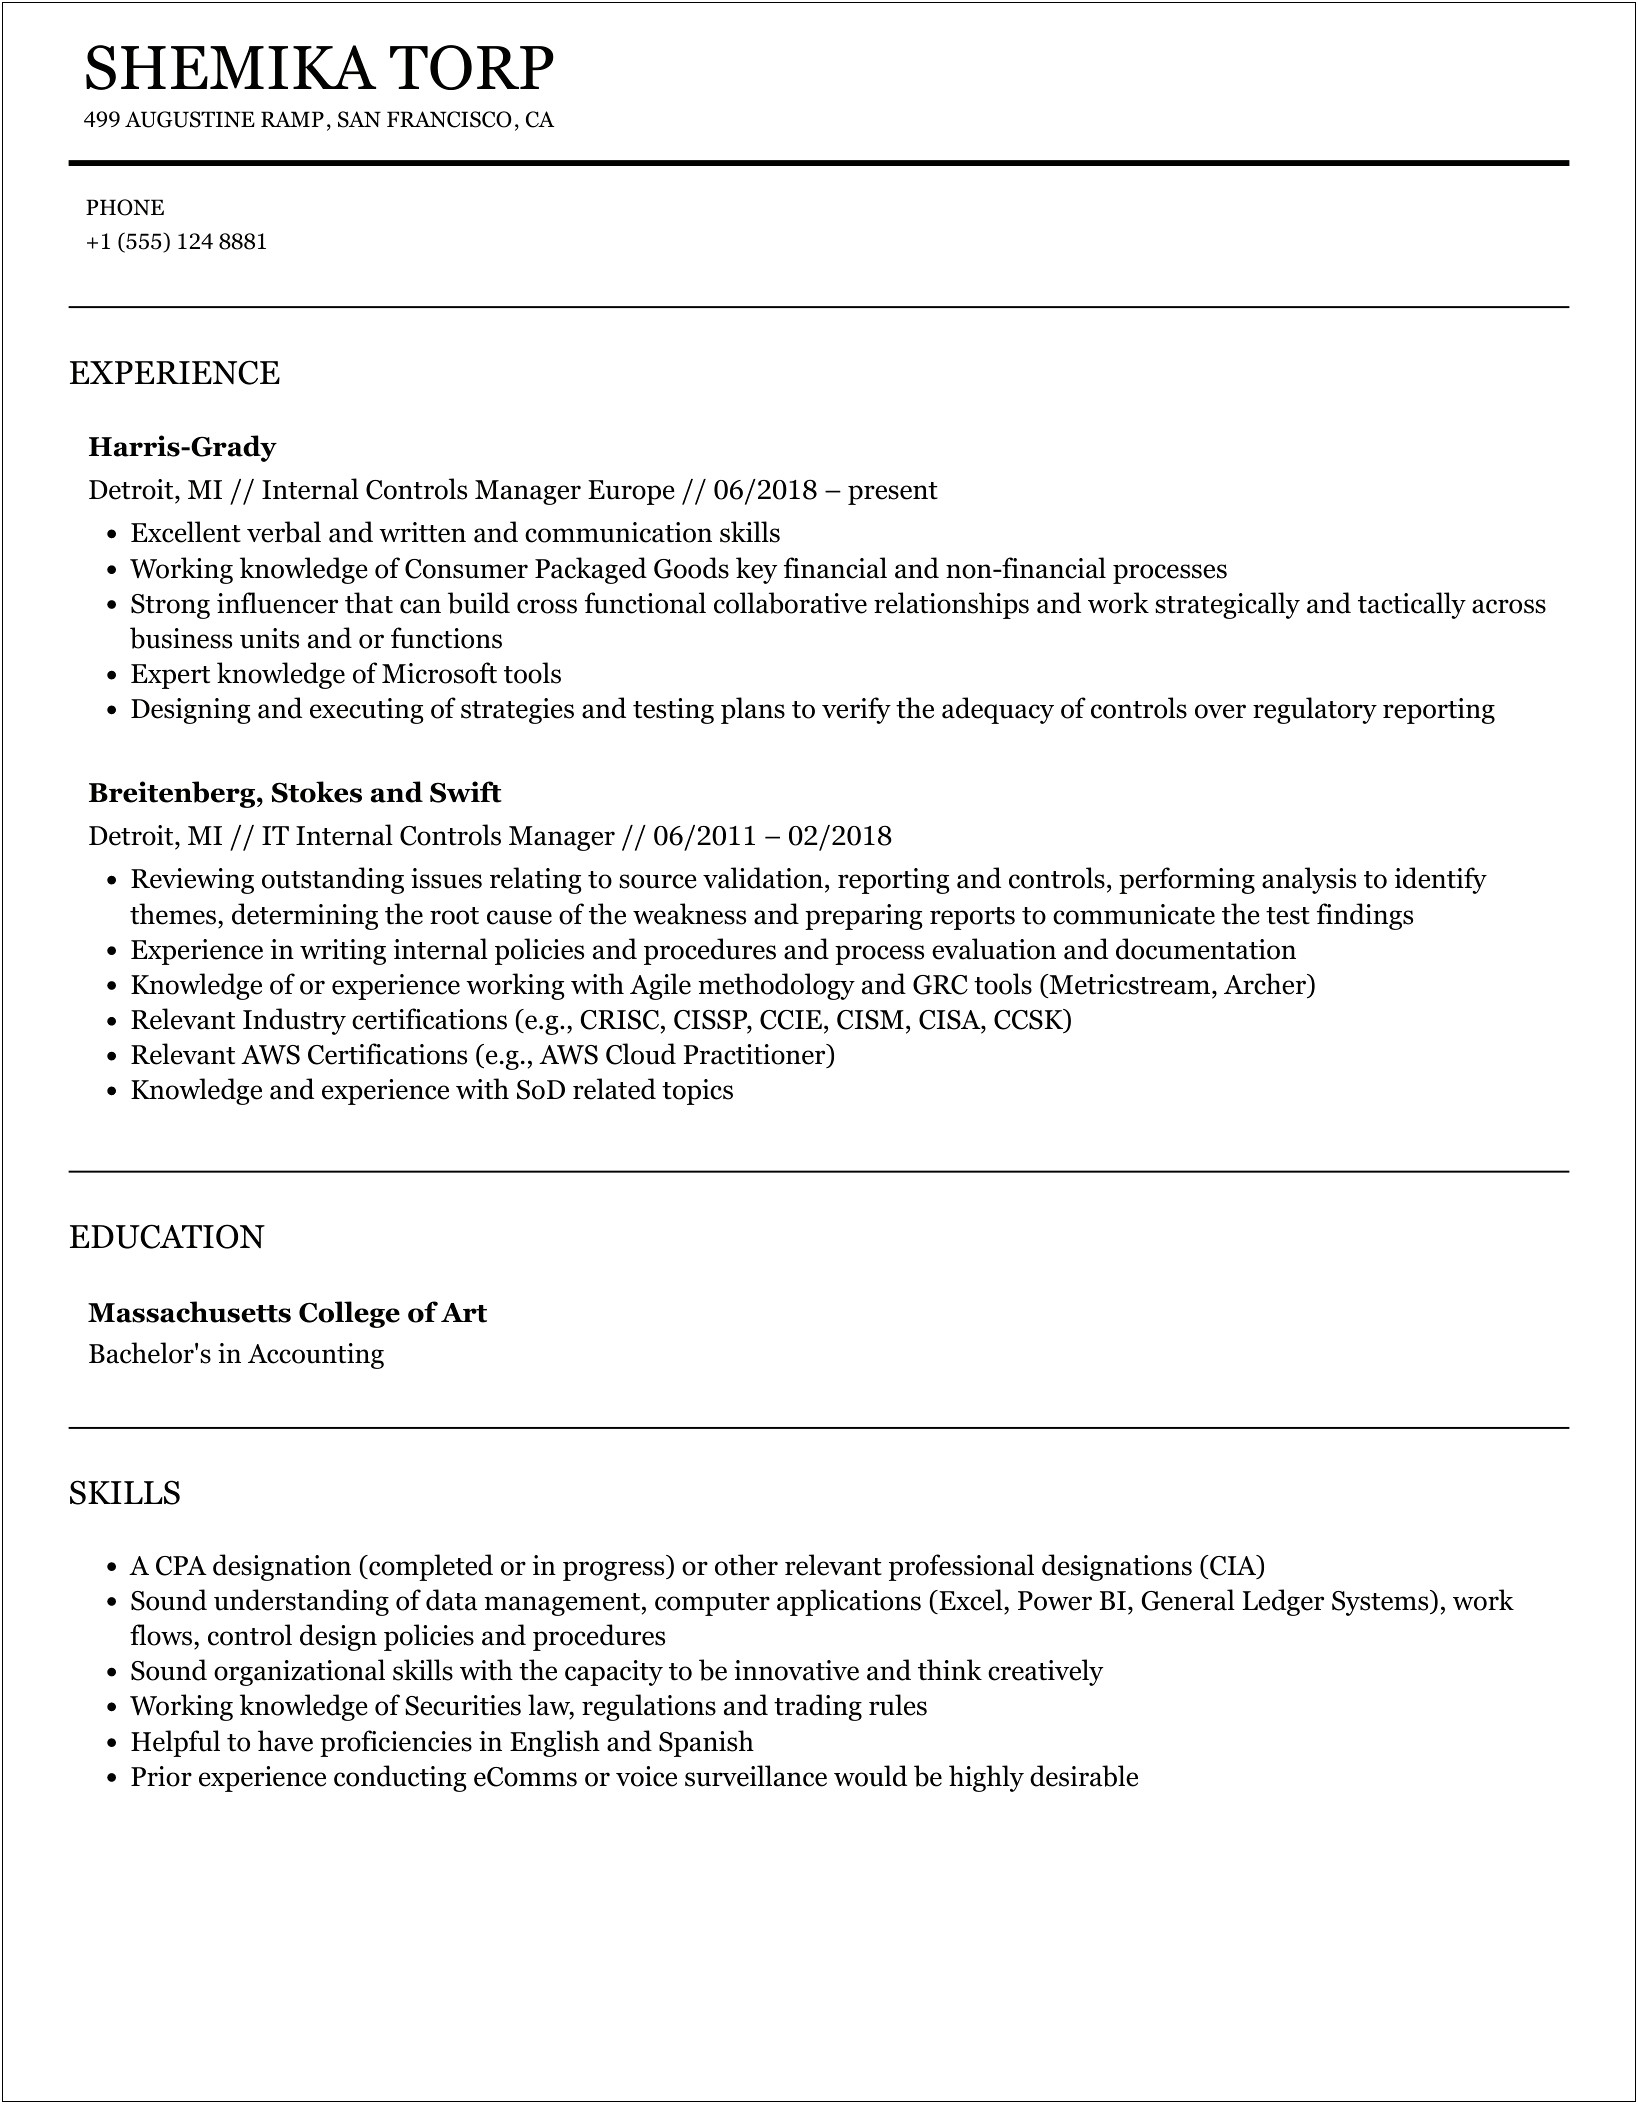 Portland State School Of Business Resume Toolkit